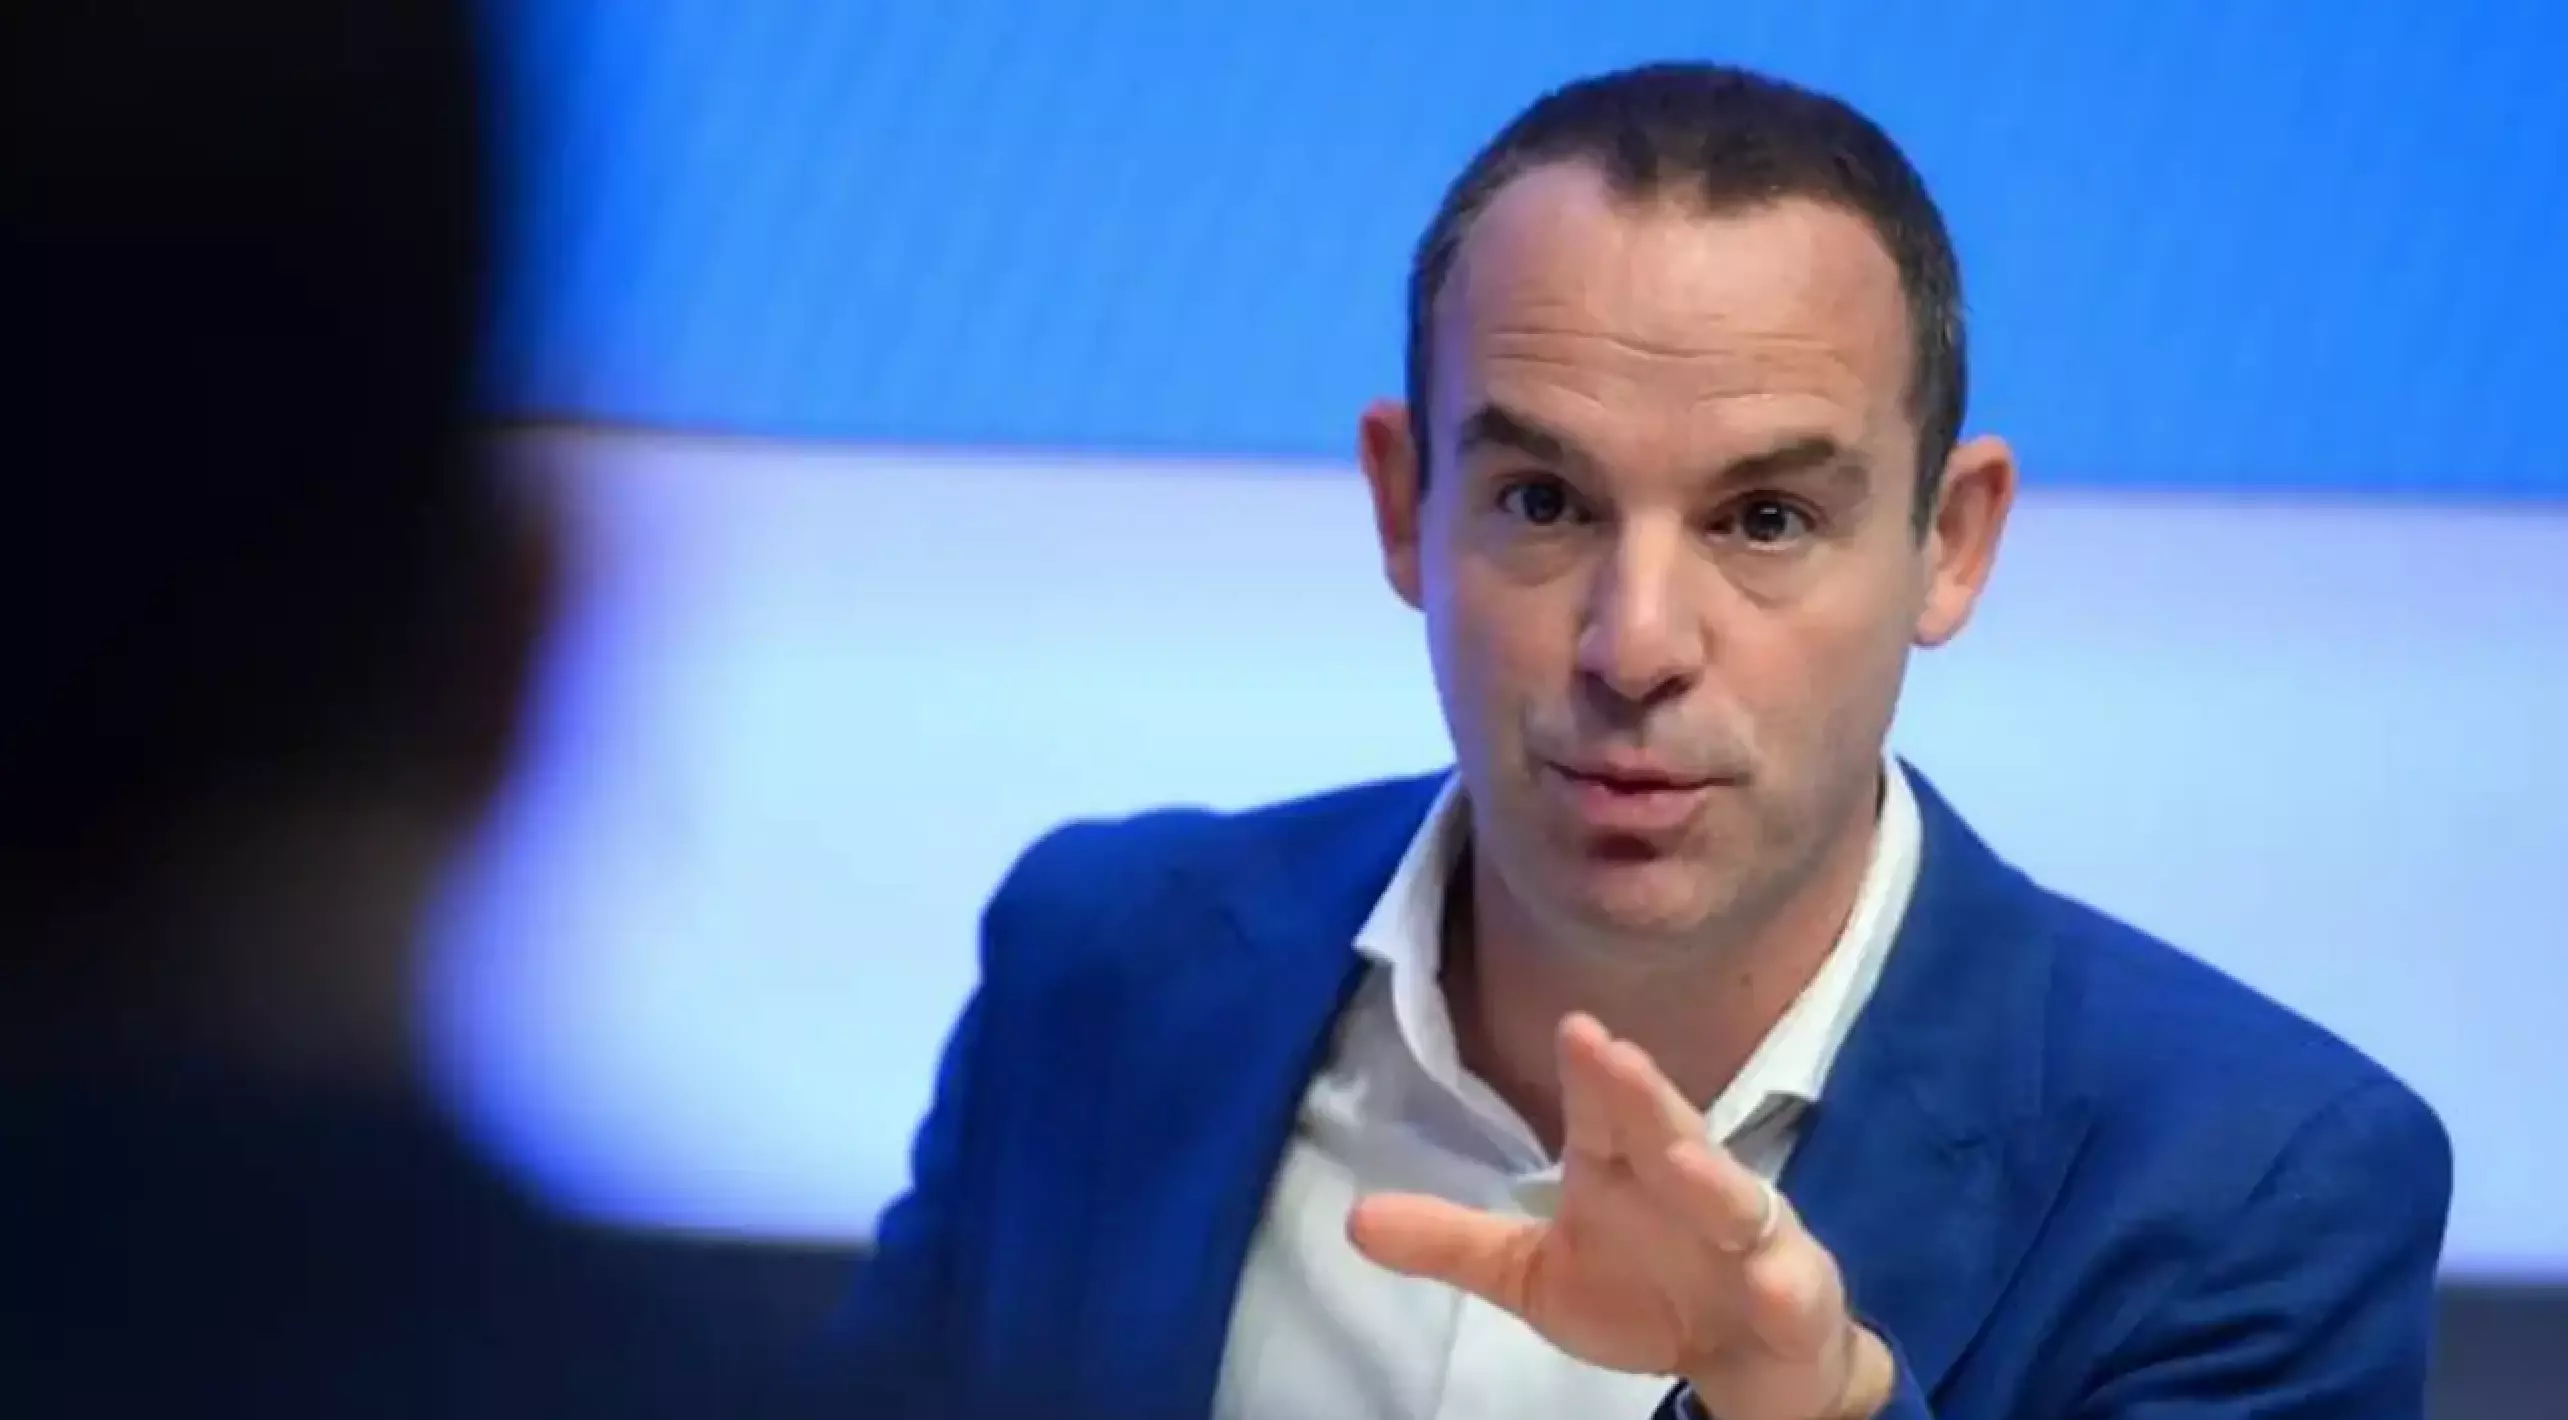 Martin Lewis has given lots of tips amid the cost of living crisis. (